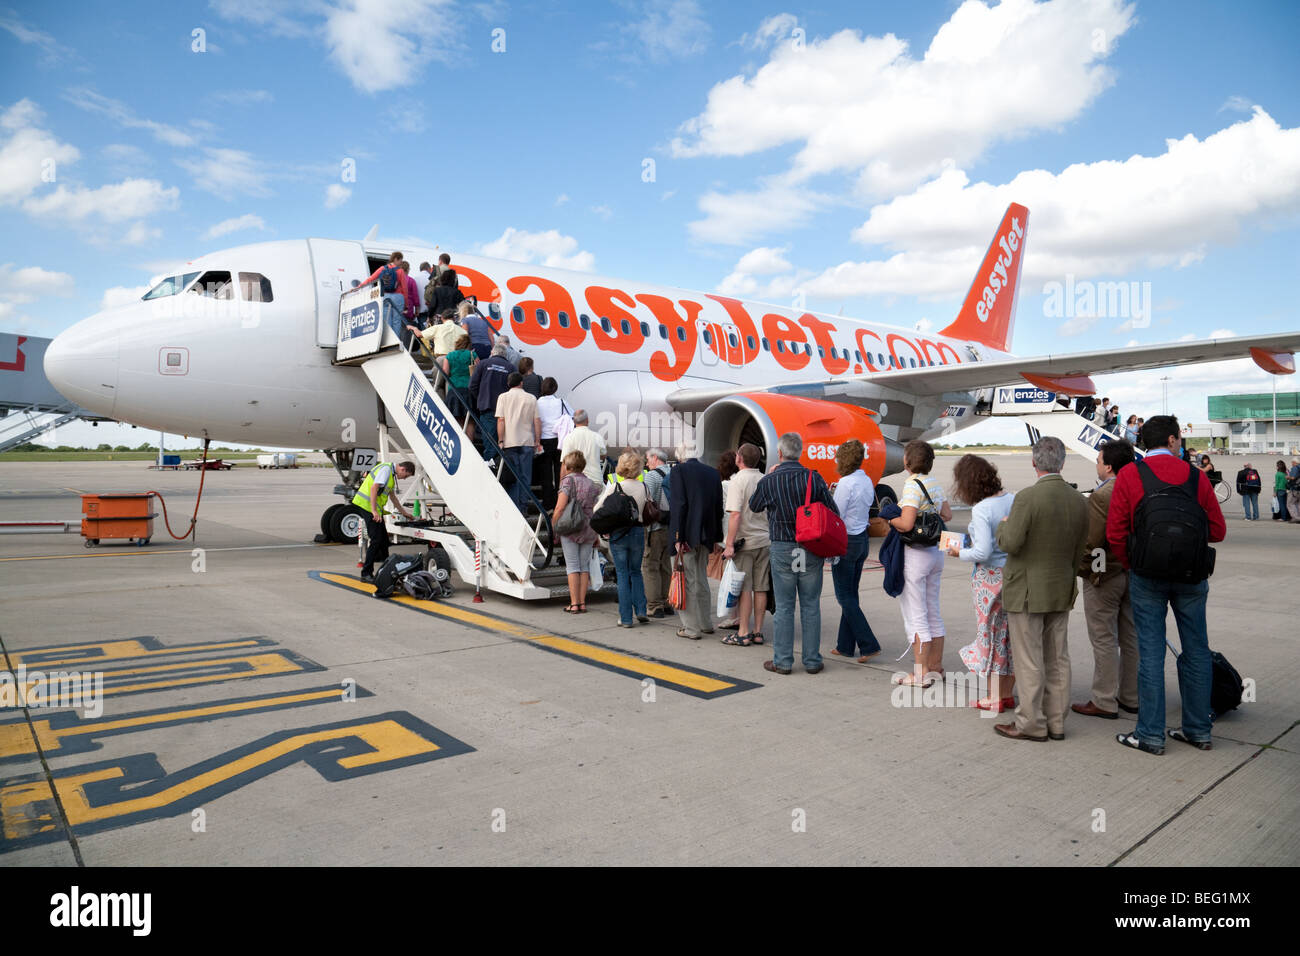 Passengers boarding an Easyjet plane at Stansted airport, UK Stock Photo